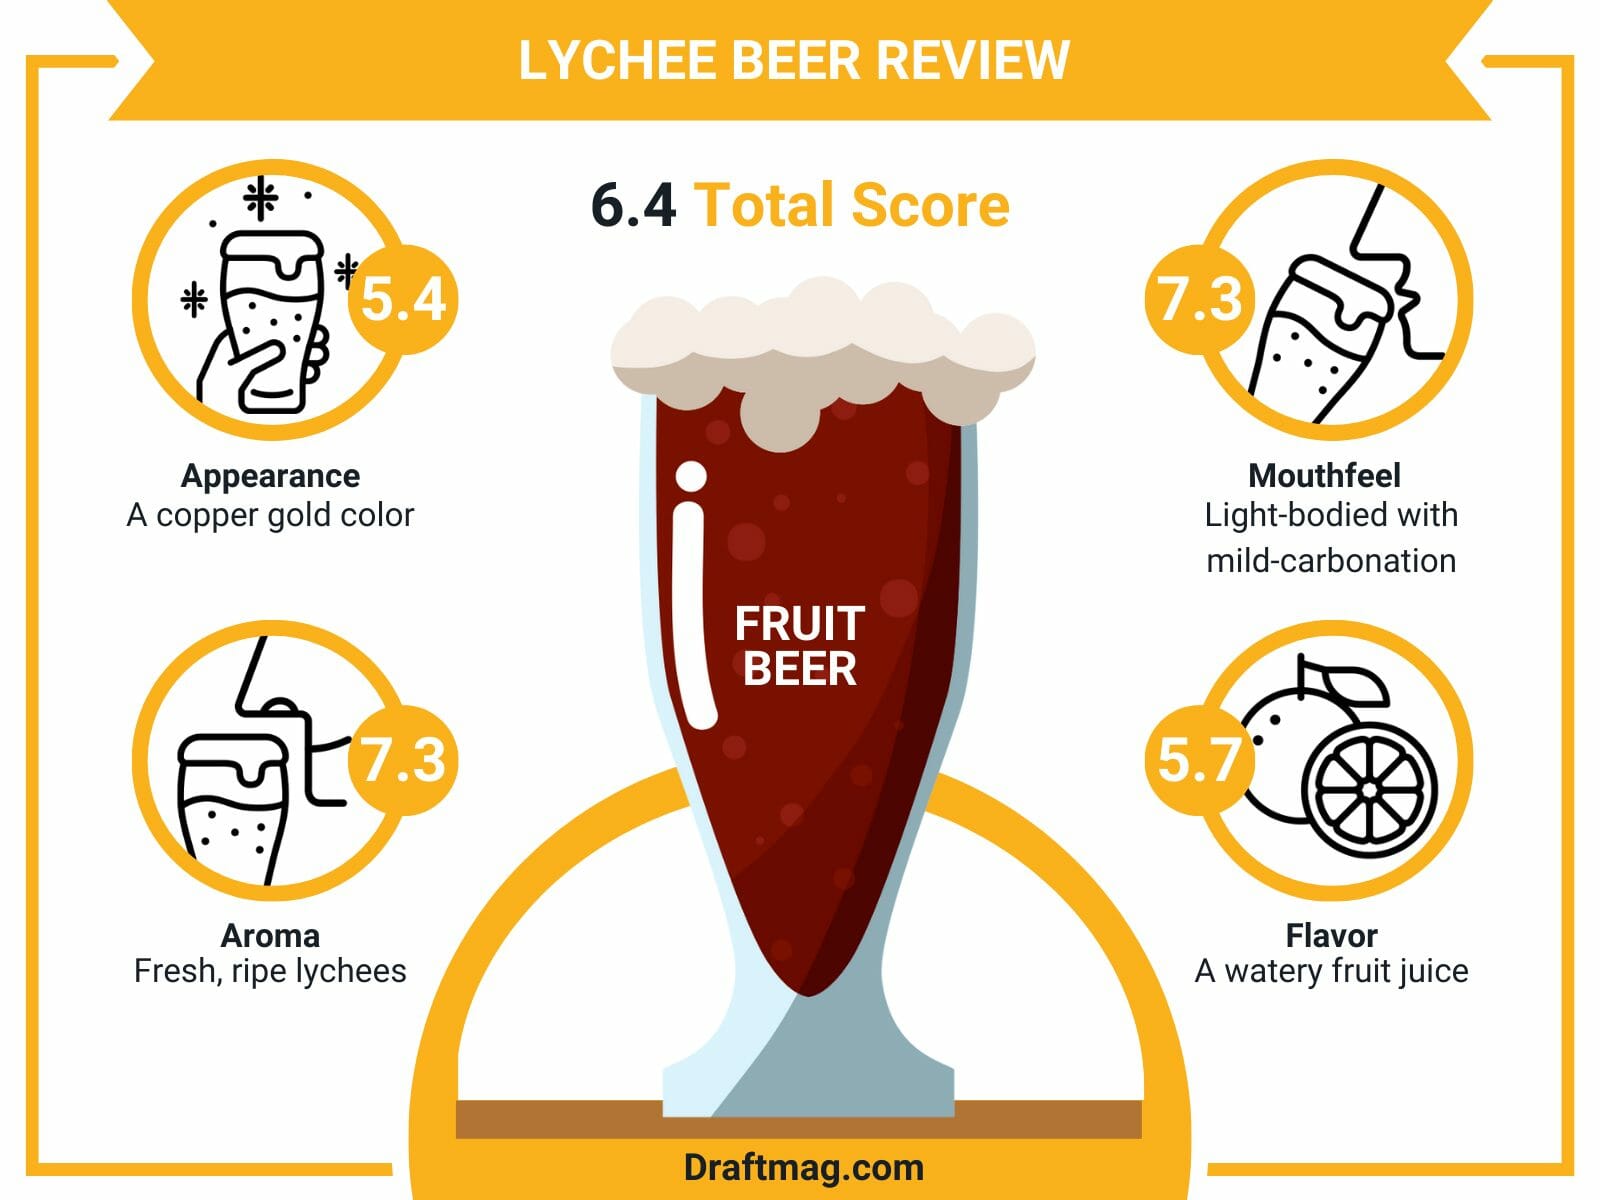 Lychee beer review infographic